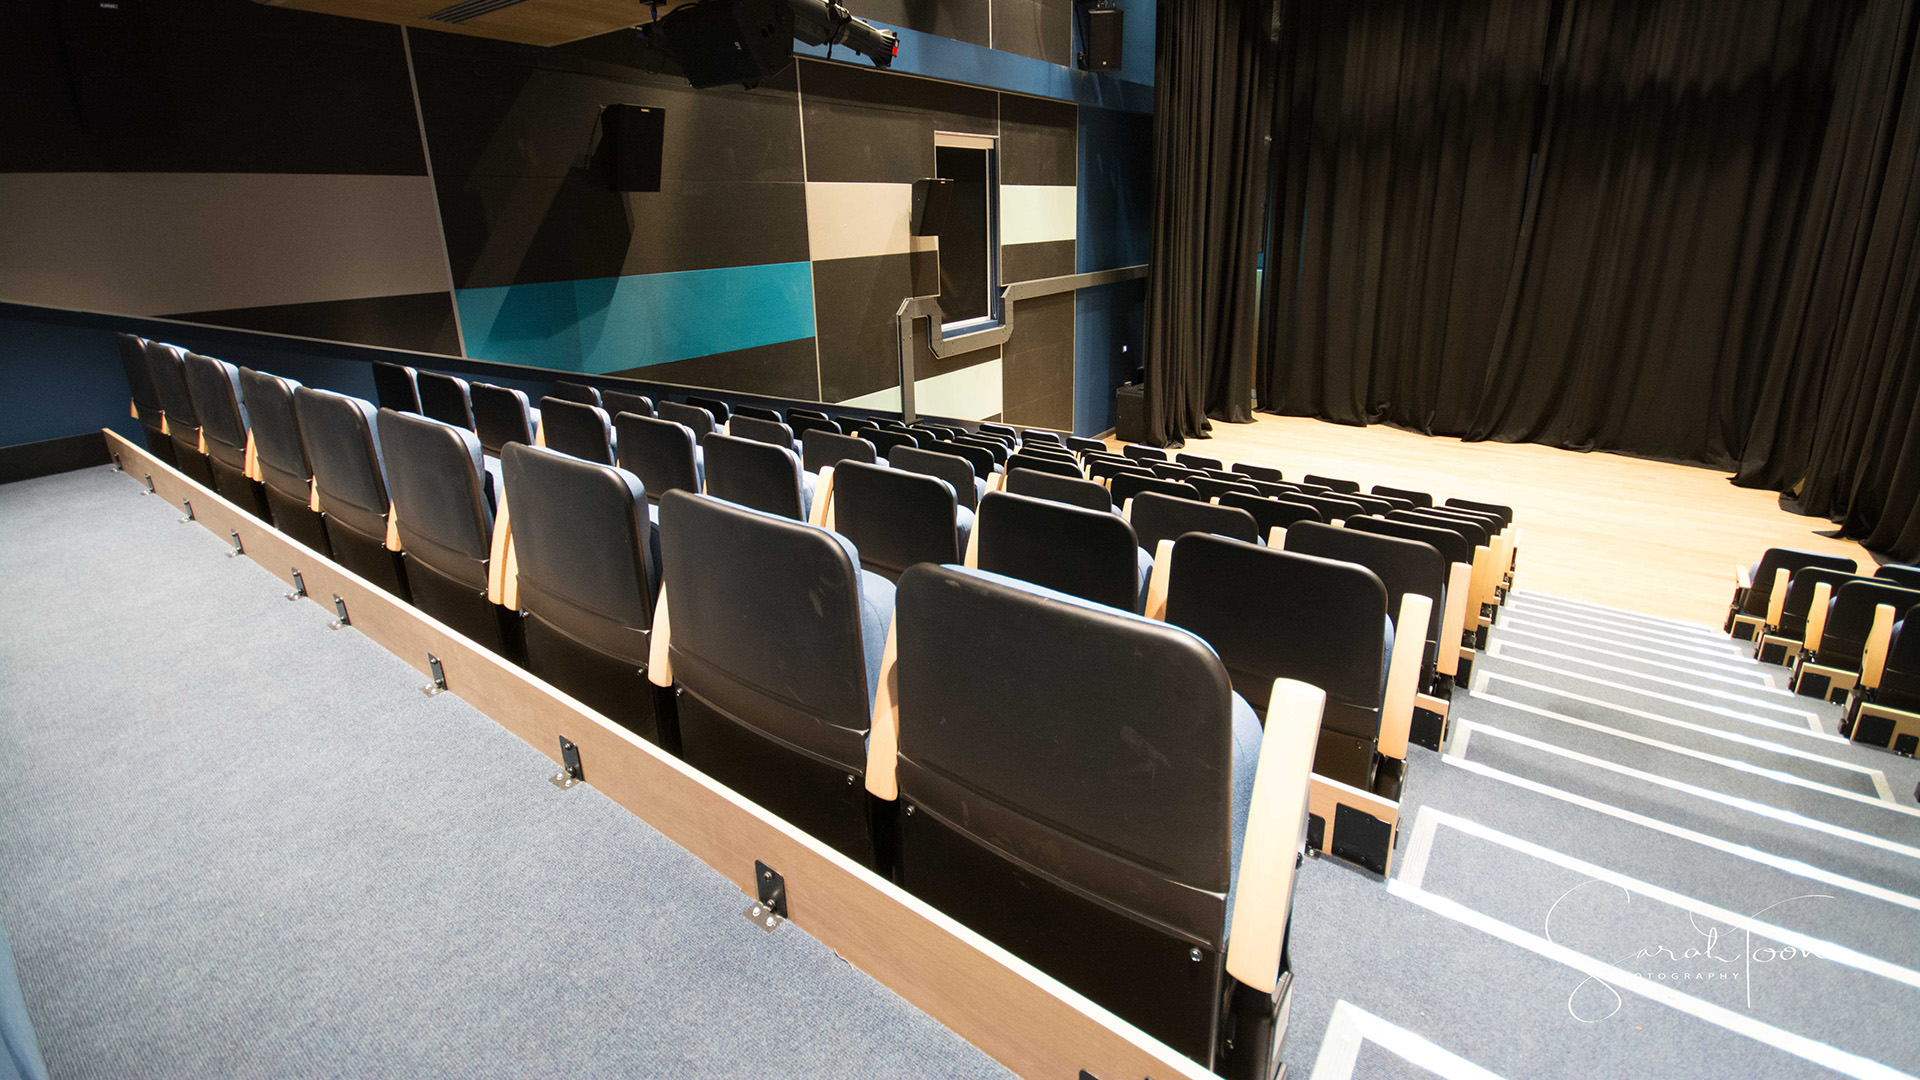 Auditorium Seats and Stage